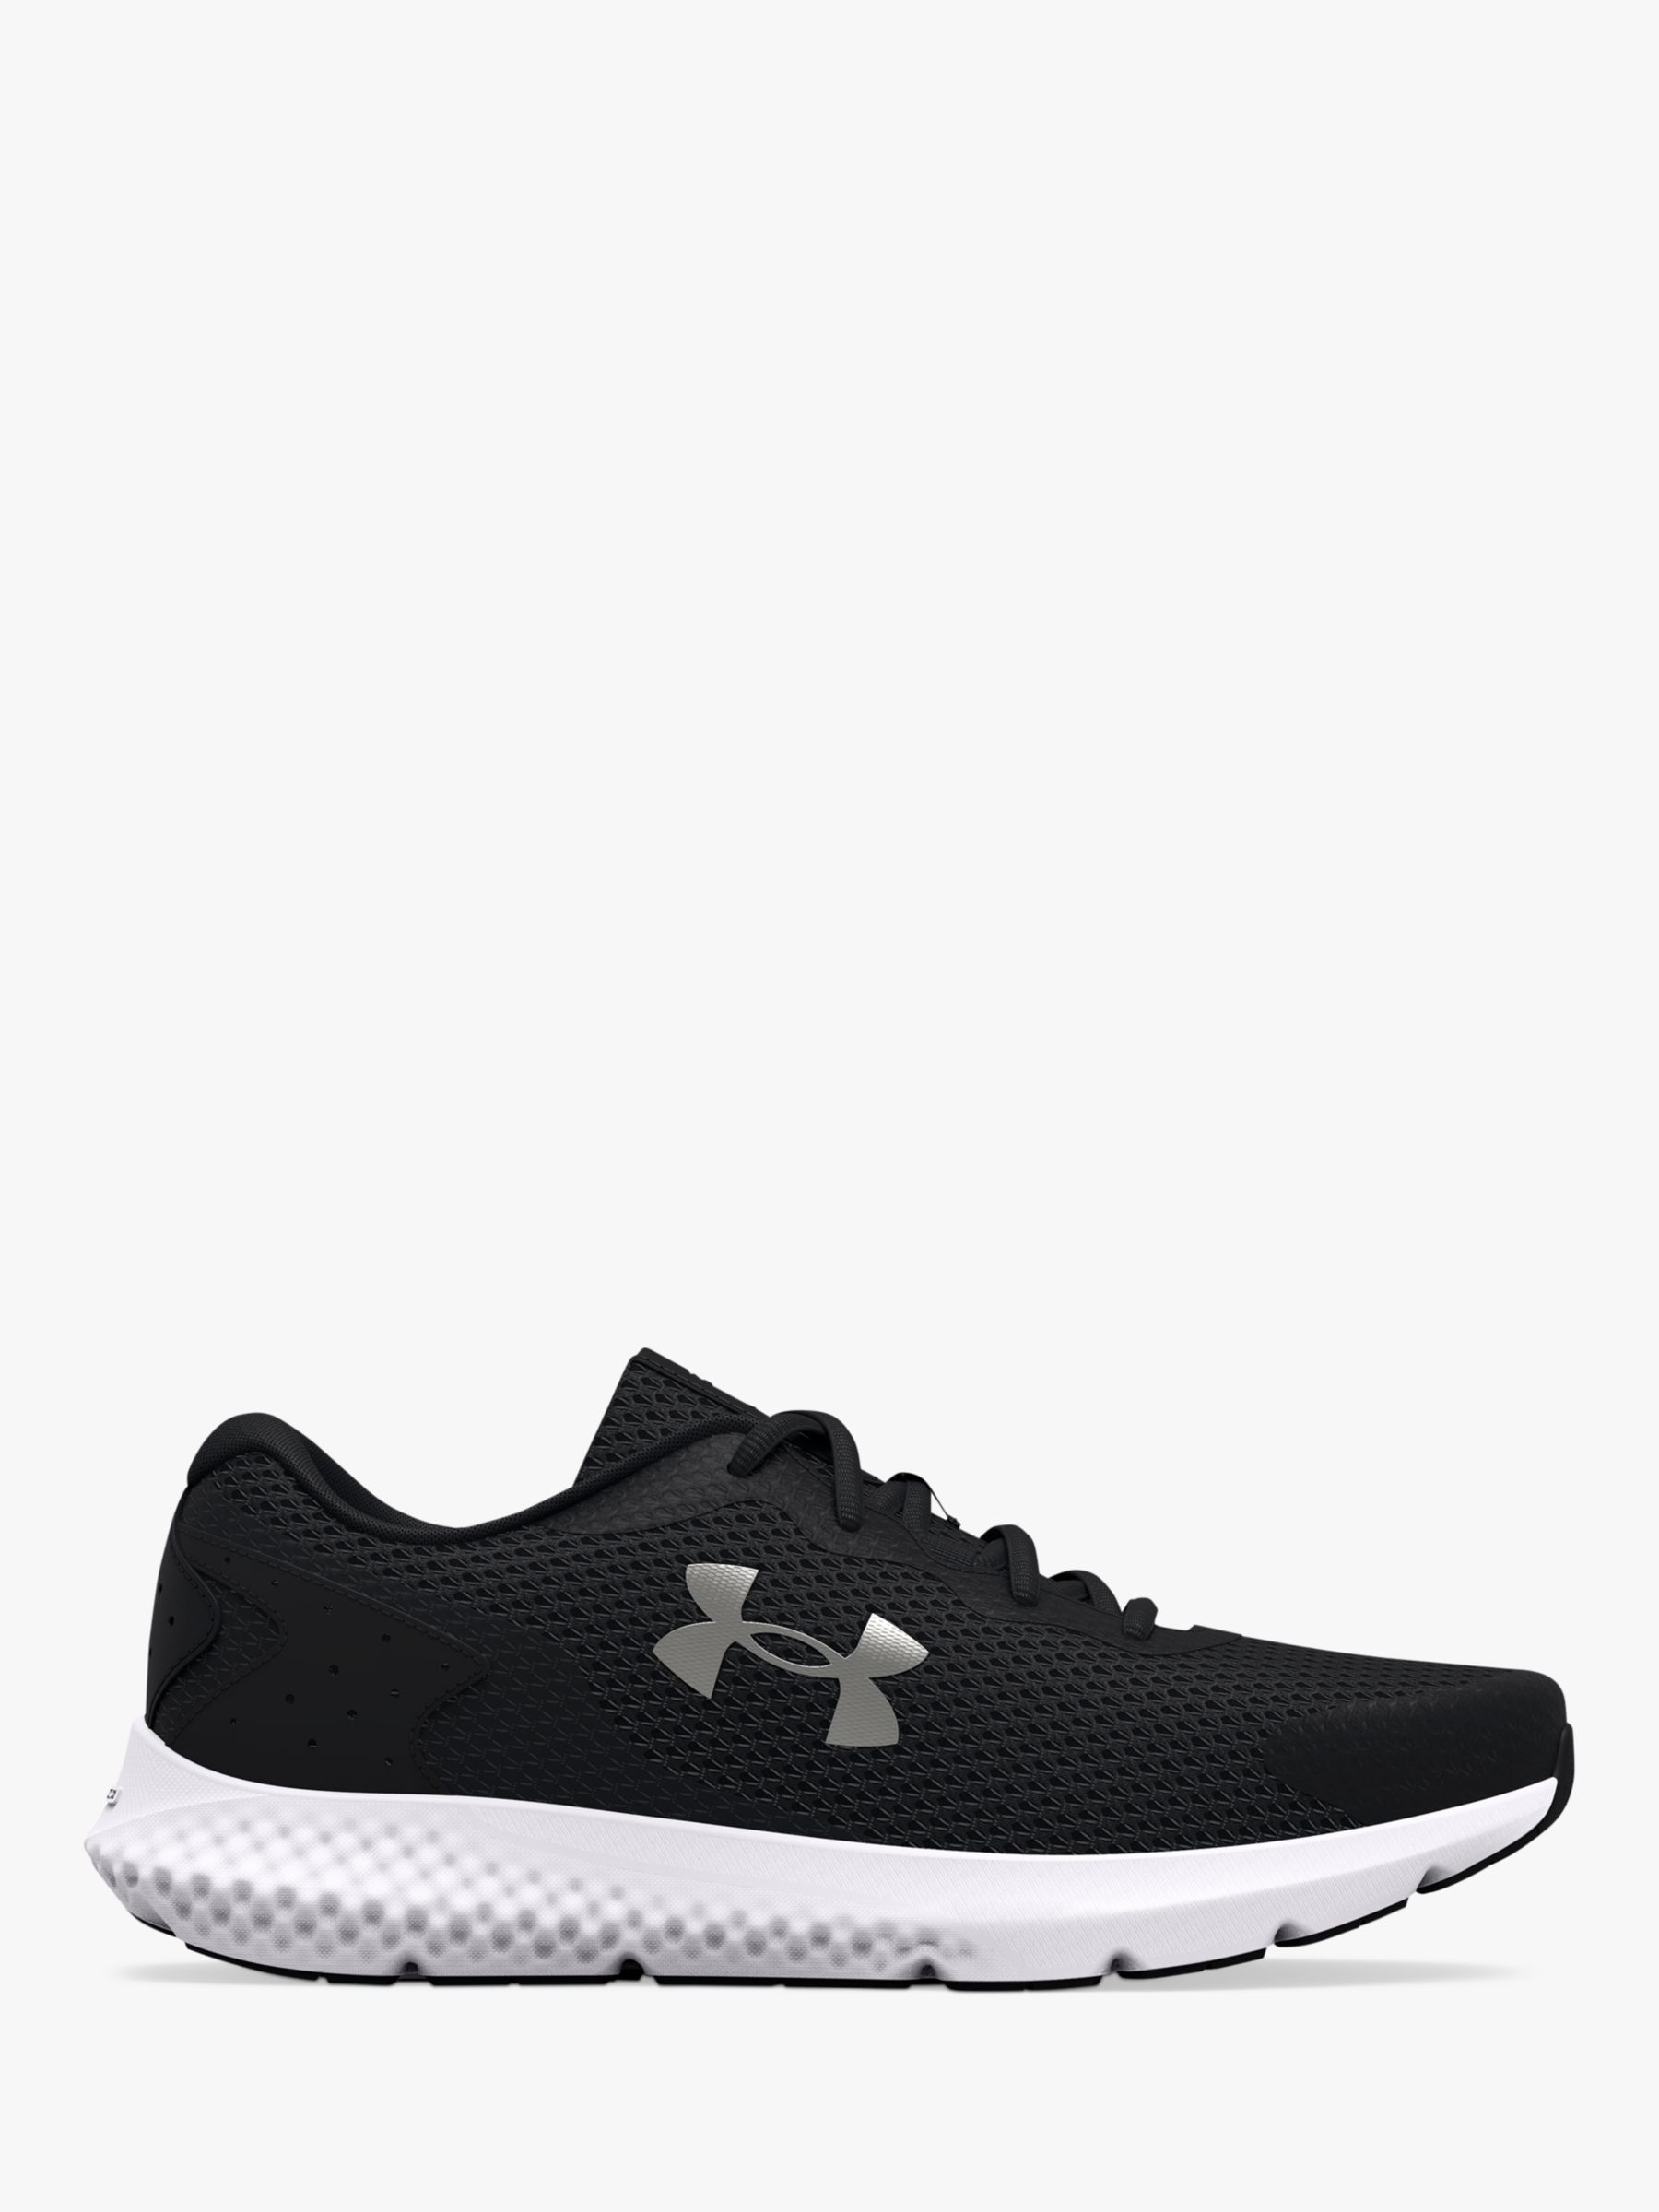 Under Armour Charged Rogue 3 Women's Running Shoes